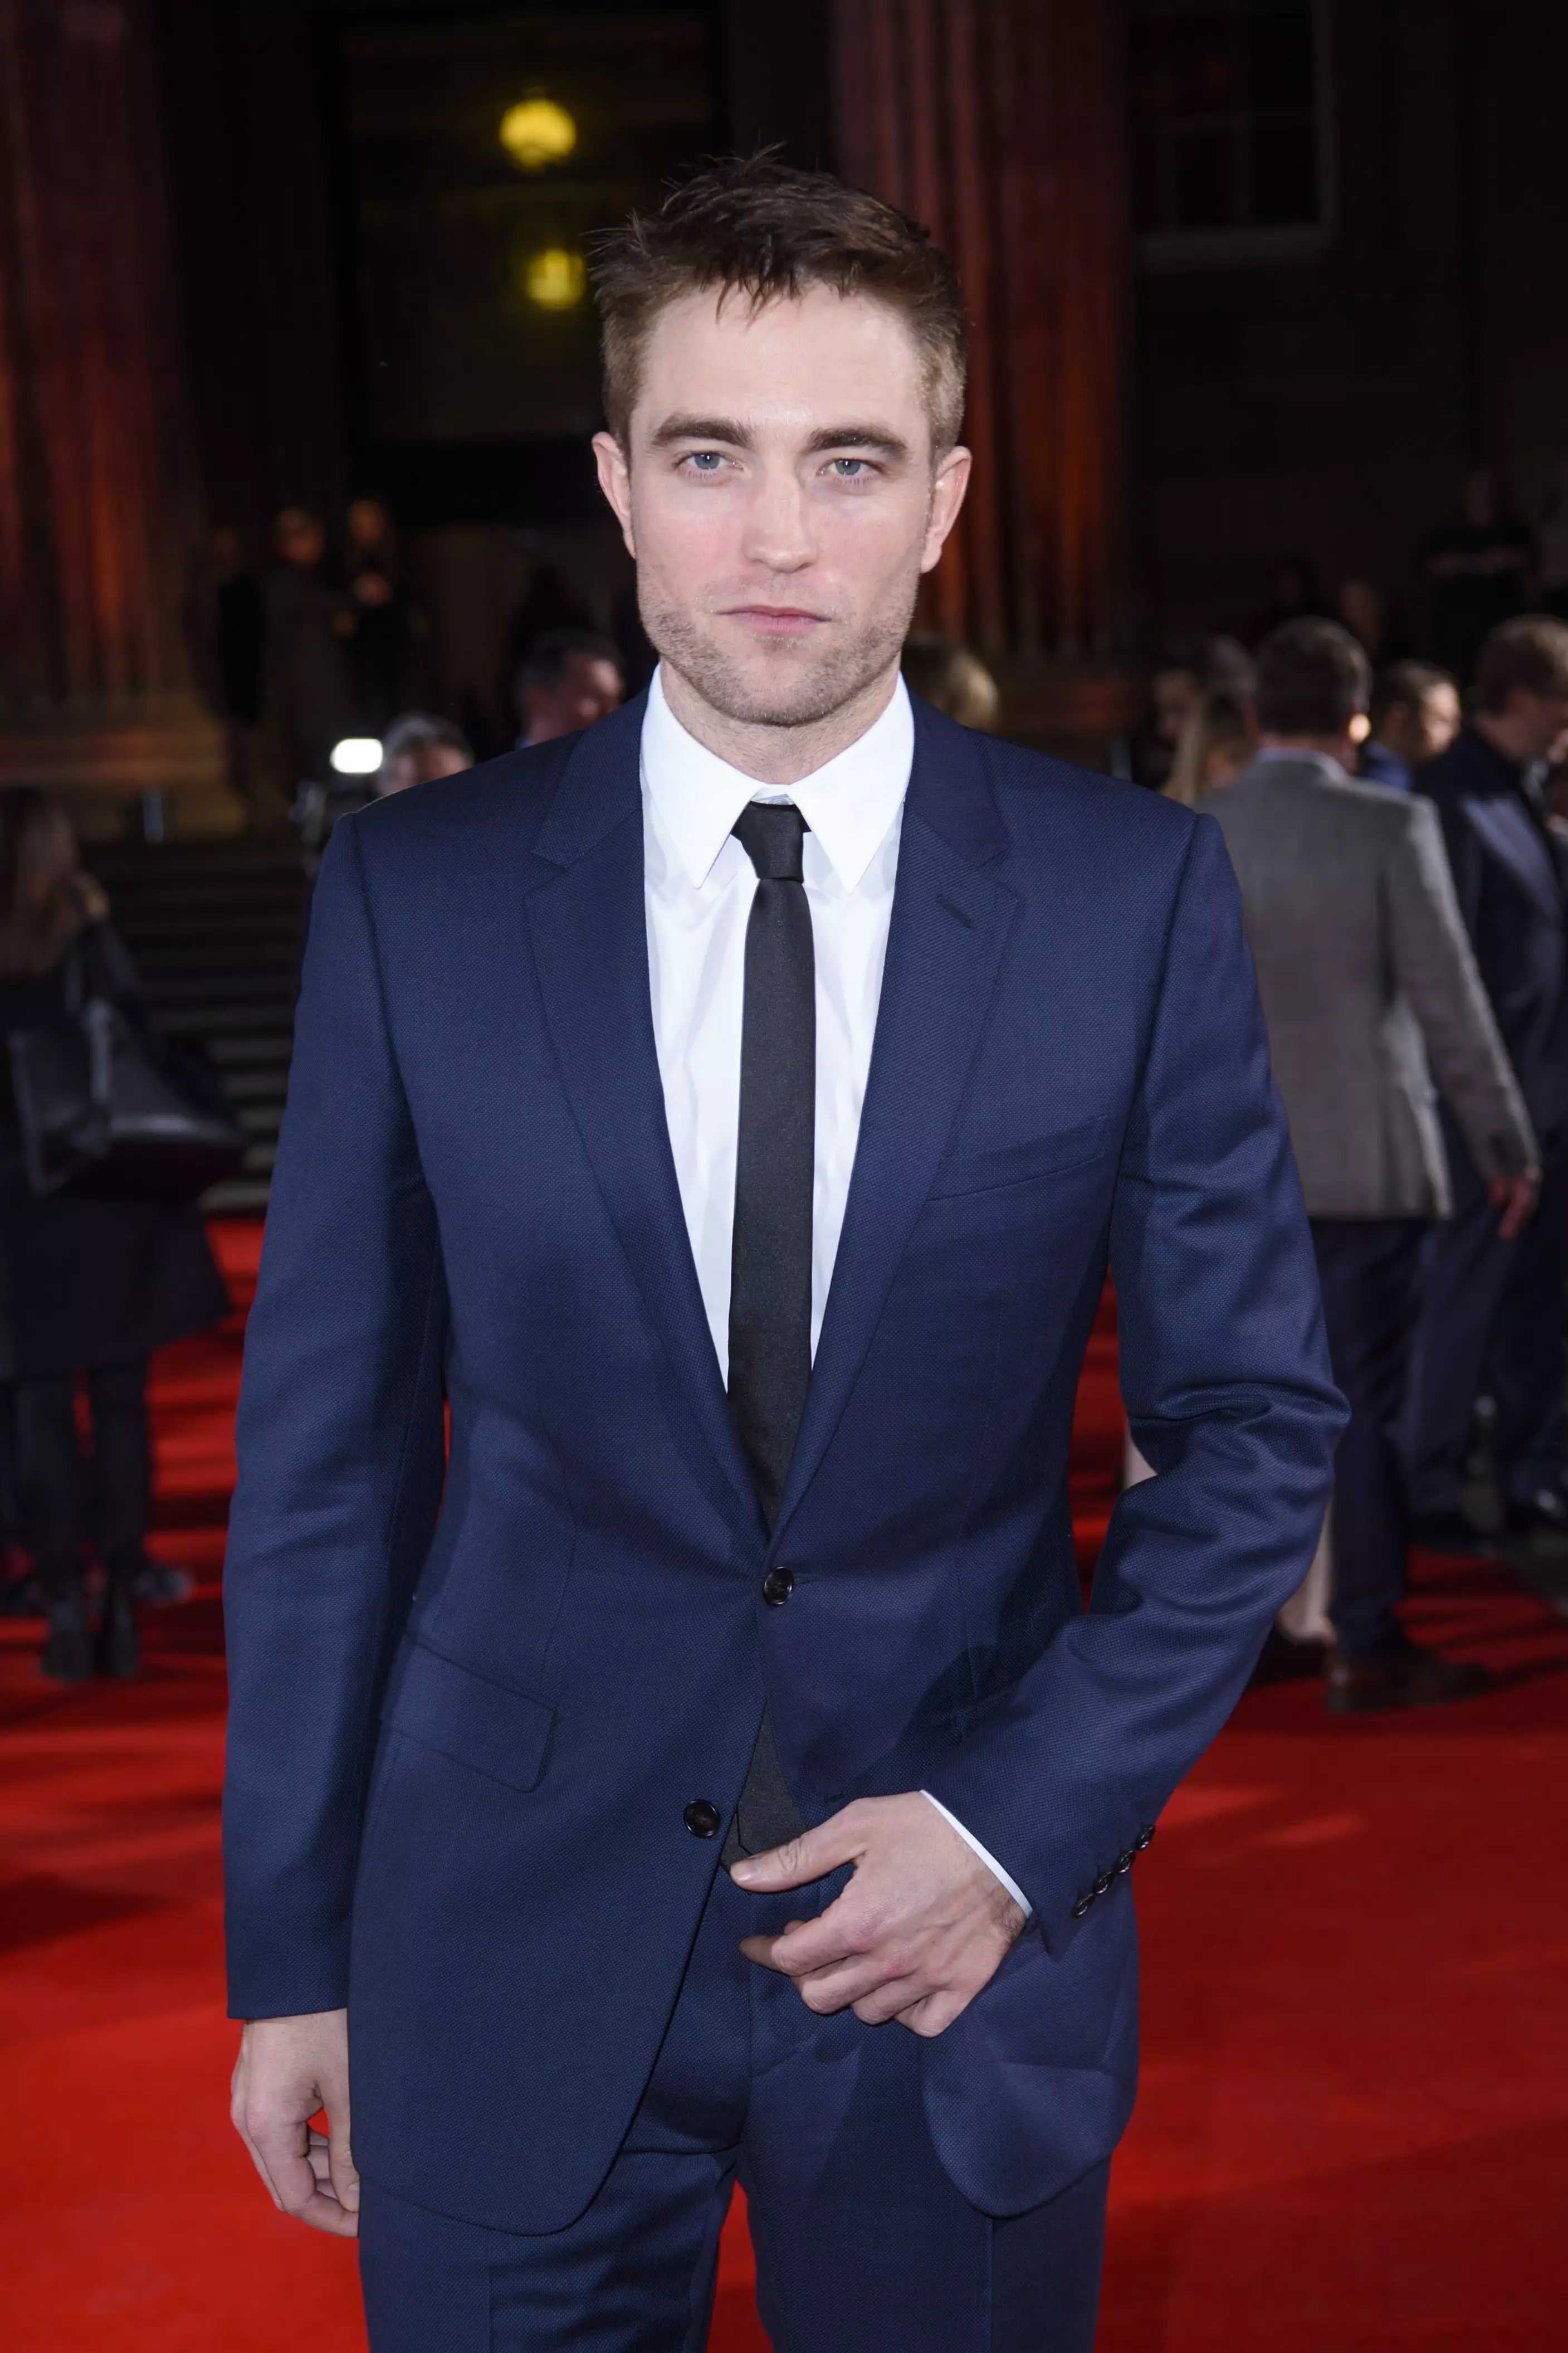 Robert Pattinson is the latest actor to play the Caped Crusader.